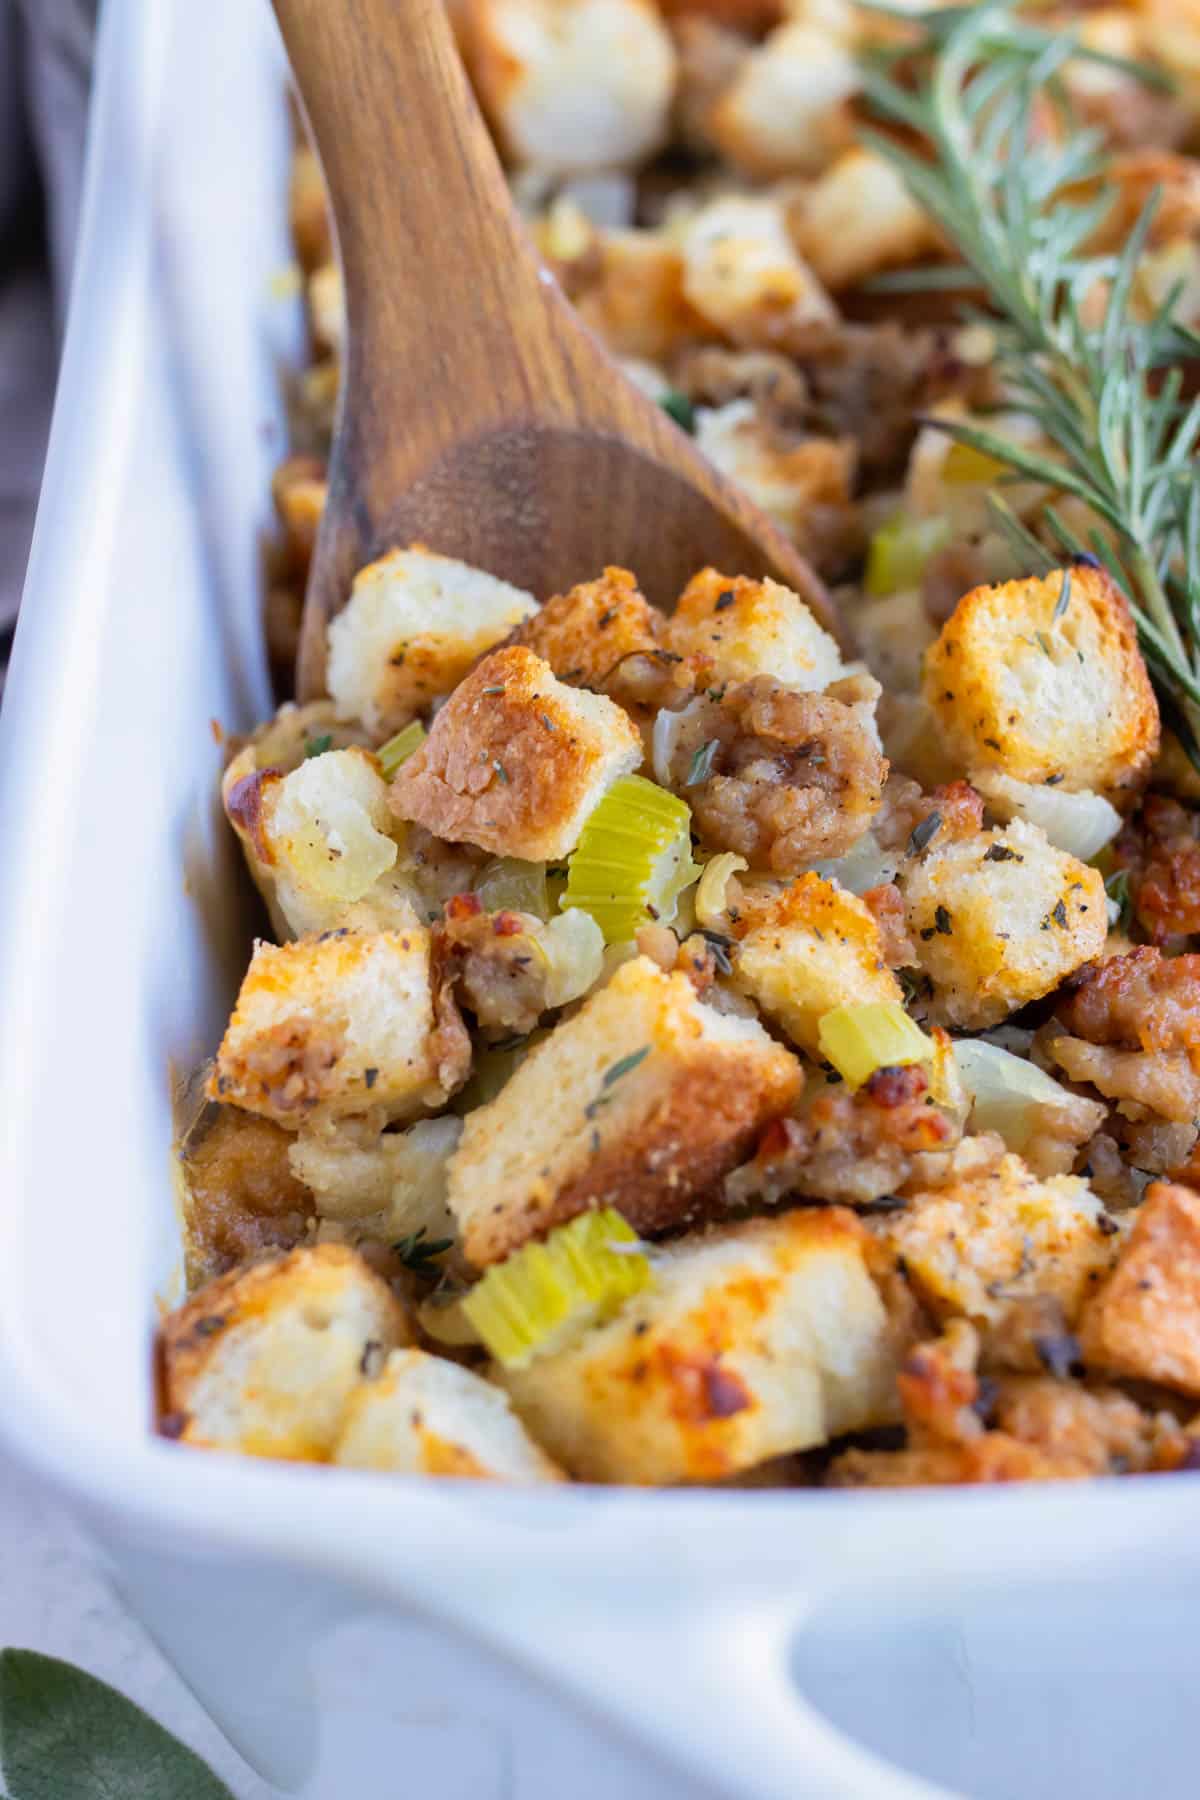 Homemade stuffing is served for the best Thanksgiving side.